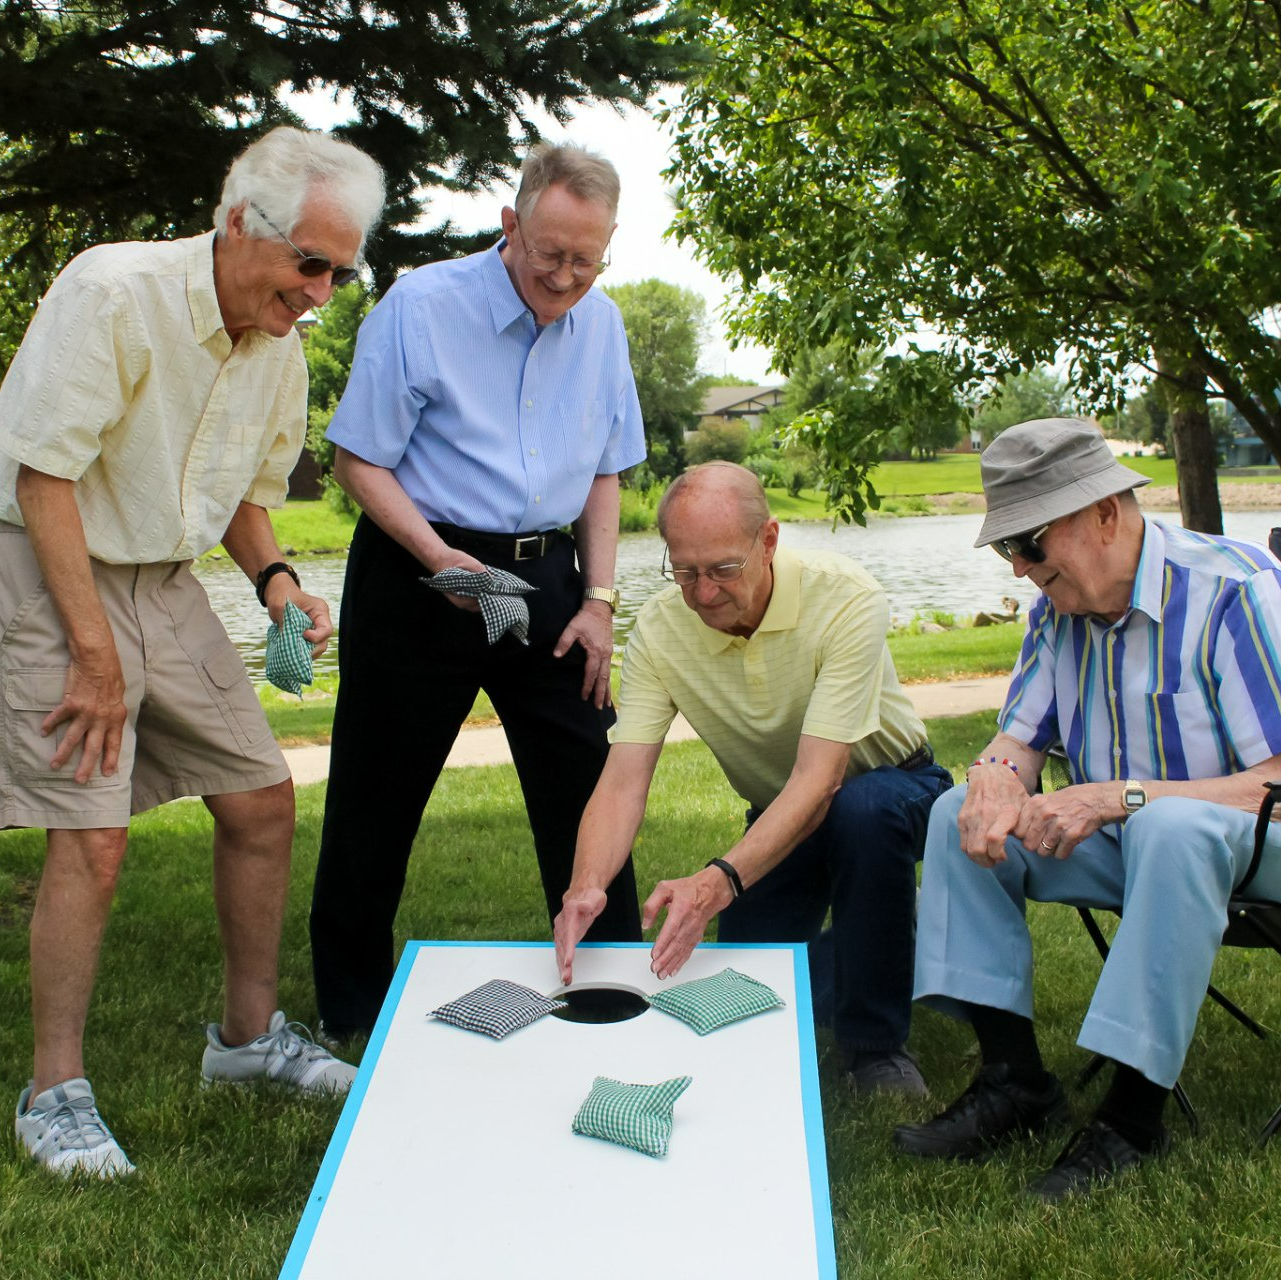 Group of retired men playing corn hole and contemplating the score